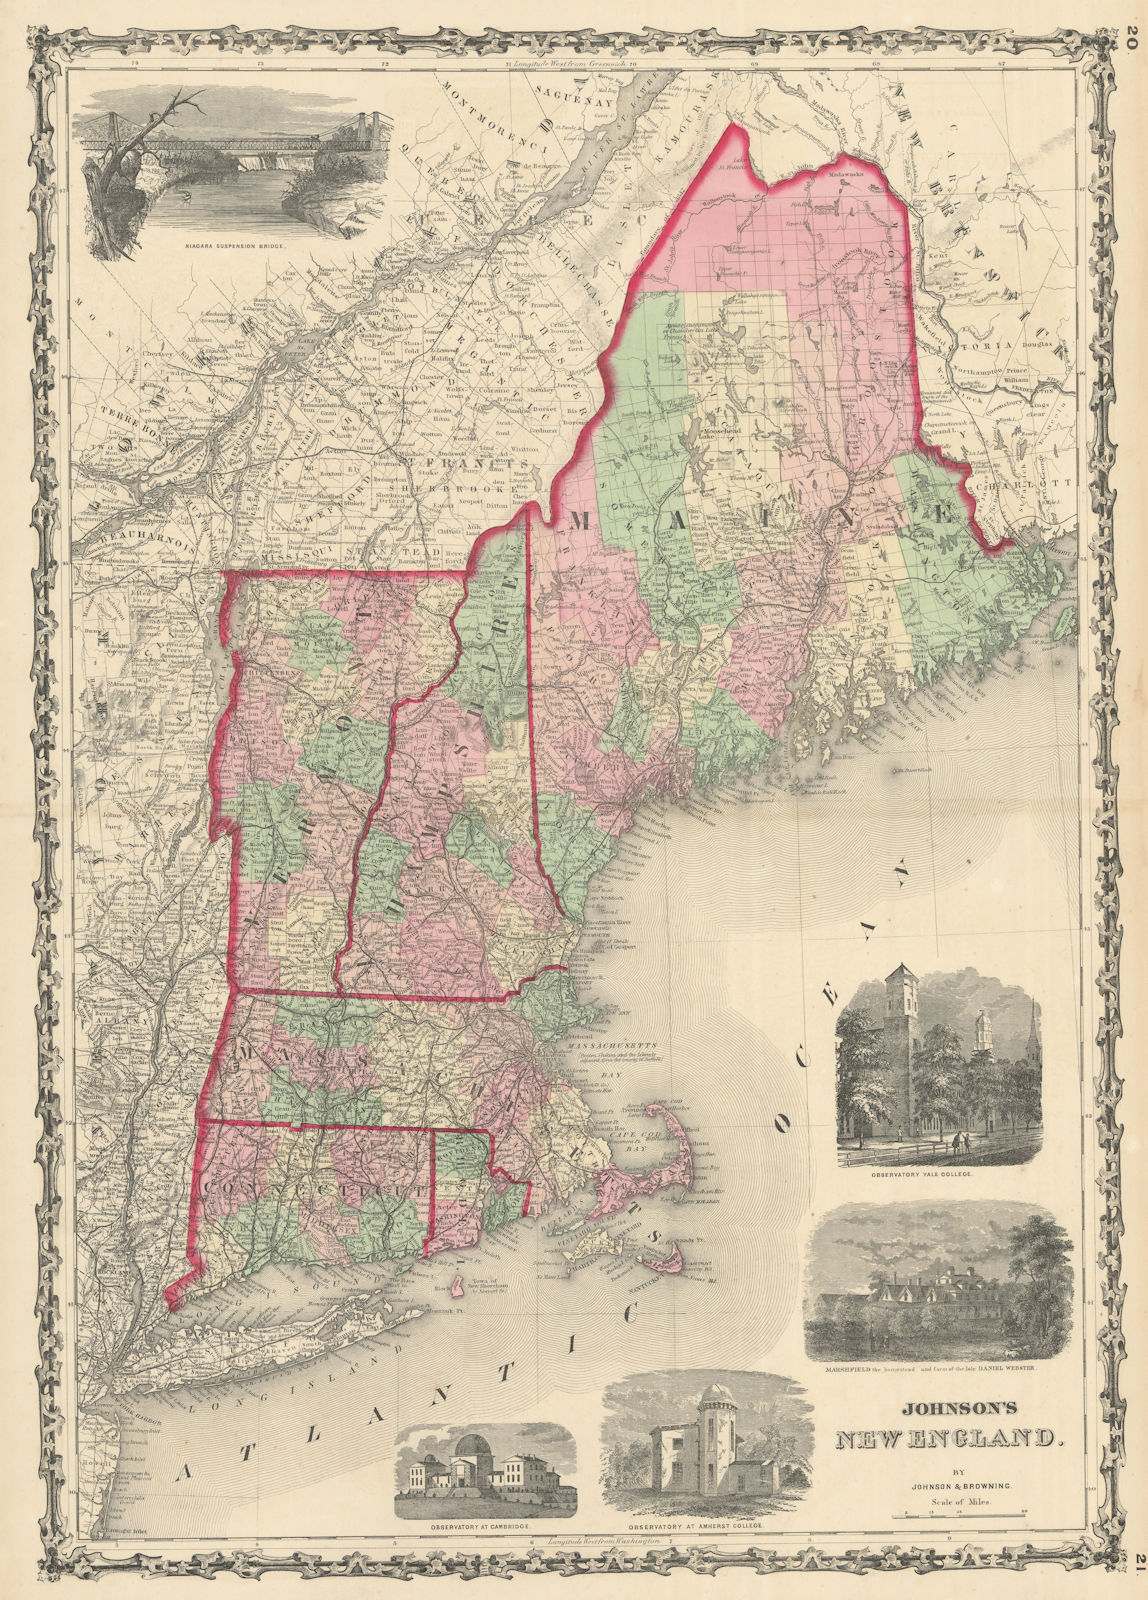 Associate Product Johnson's New England. Maine NH Vermont Massachusetts Connecticut 1861 old map